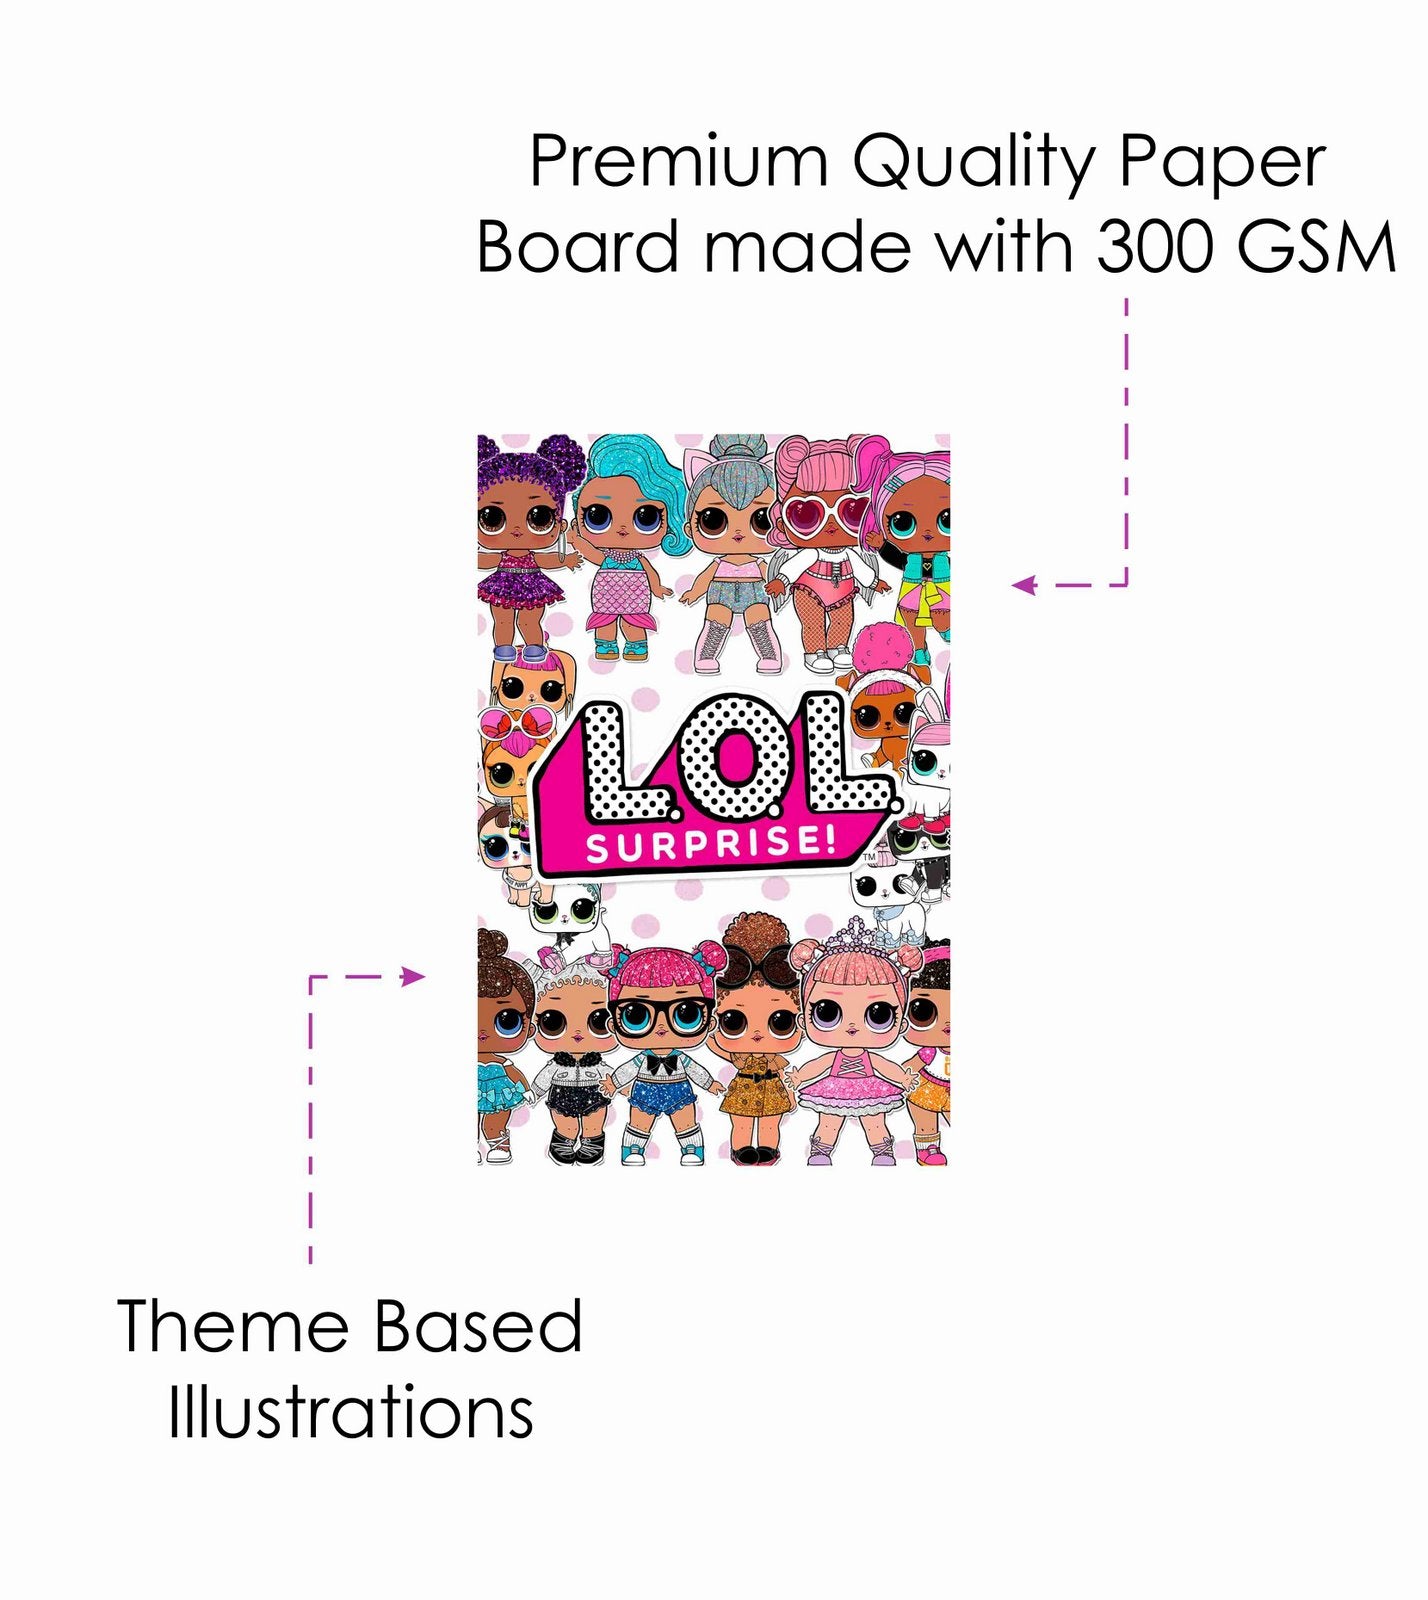 LOL Theme Children's Birthday Party Invitations Cards with Envelopes - Kids Birthday Party Invitations for Boys or Girls,- Invitation Cards (Pack of 10)